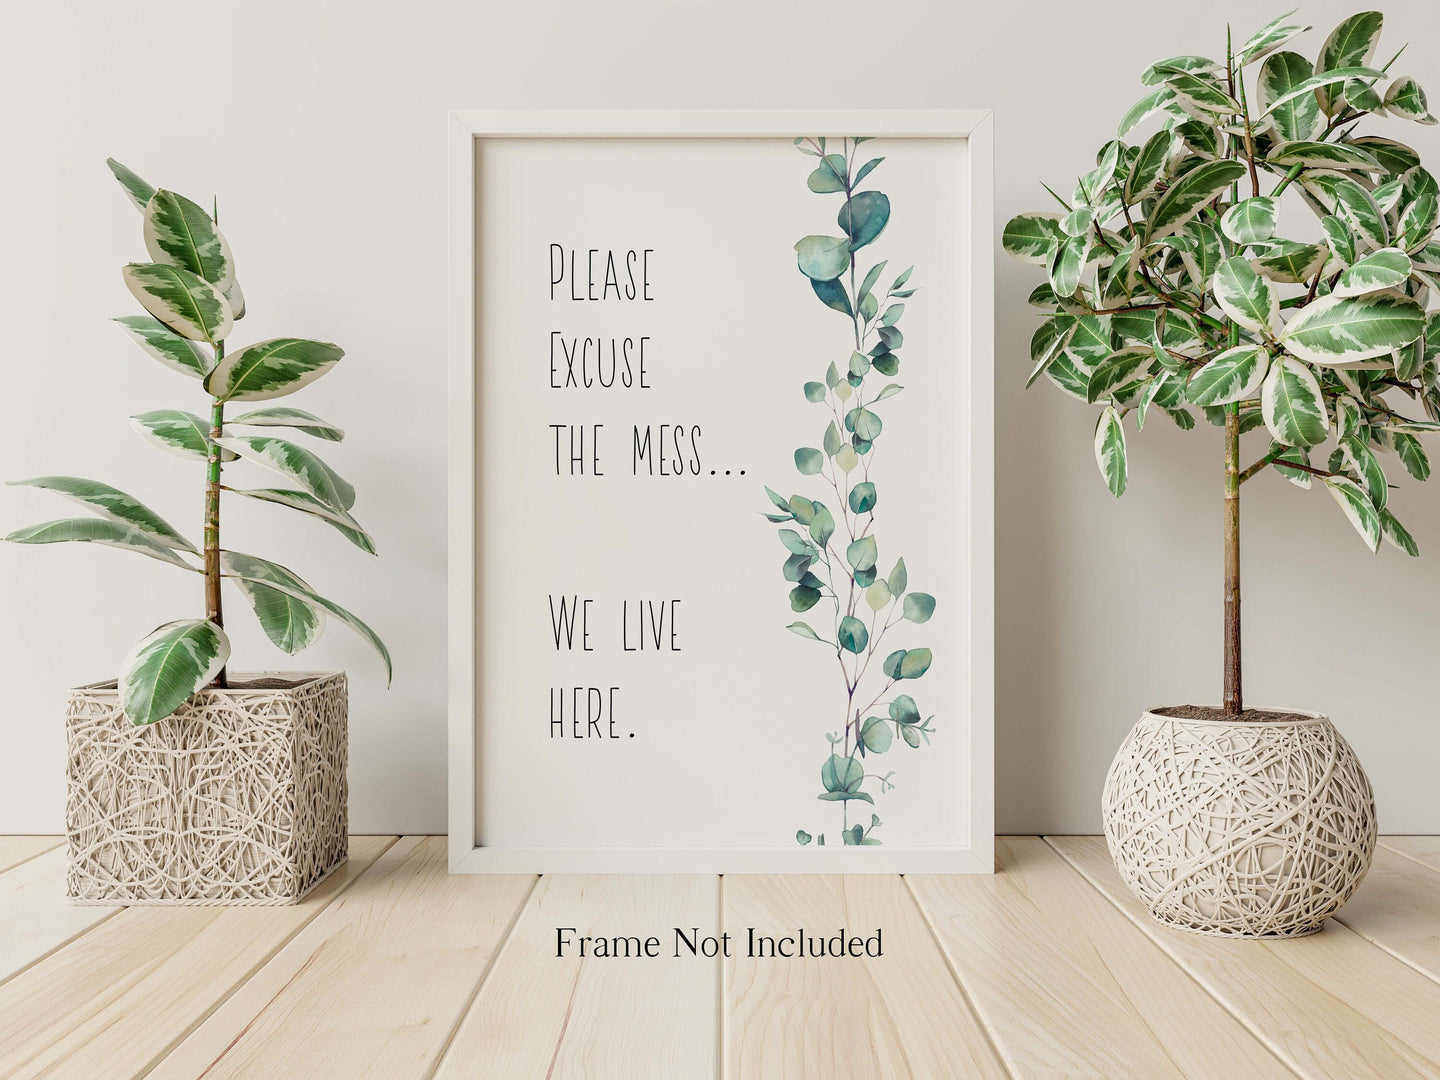 Please Excuse The Mess. We Live Here Print - Funny sign for entryway - Messy House Wall Decor - Physical Art Print Without Frame